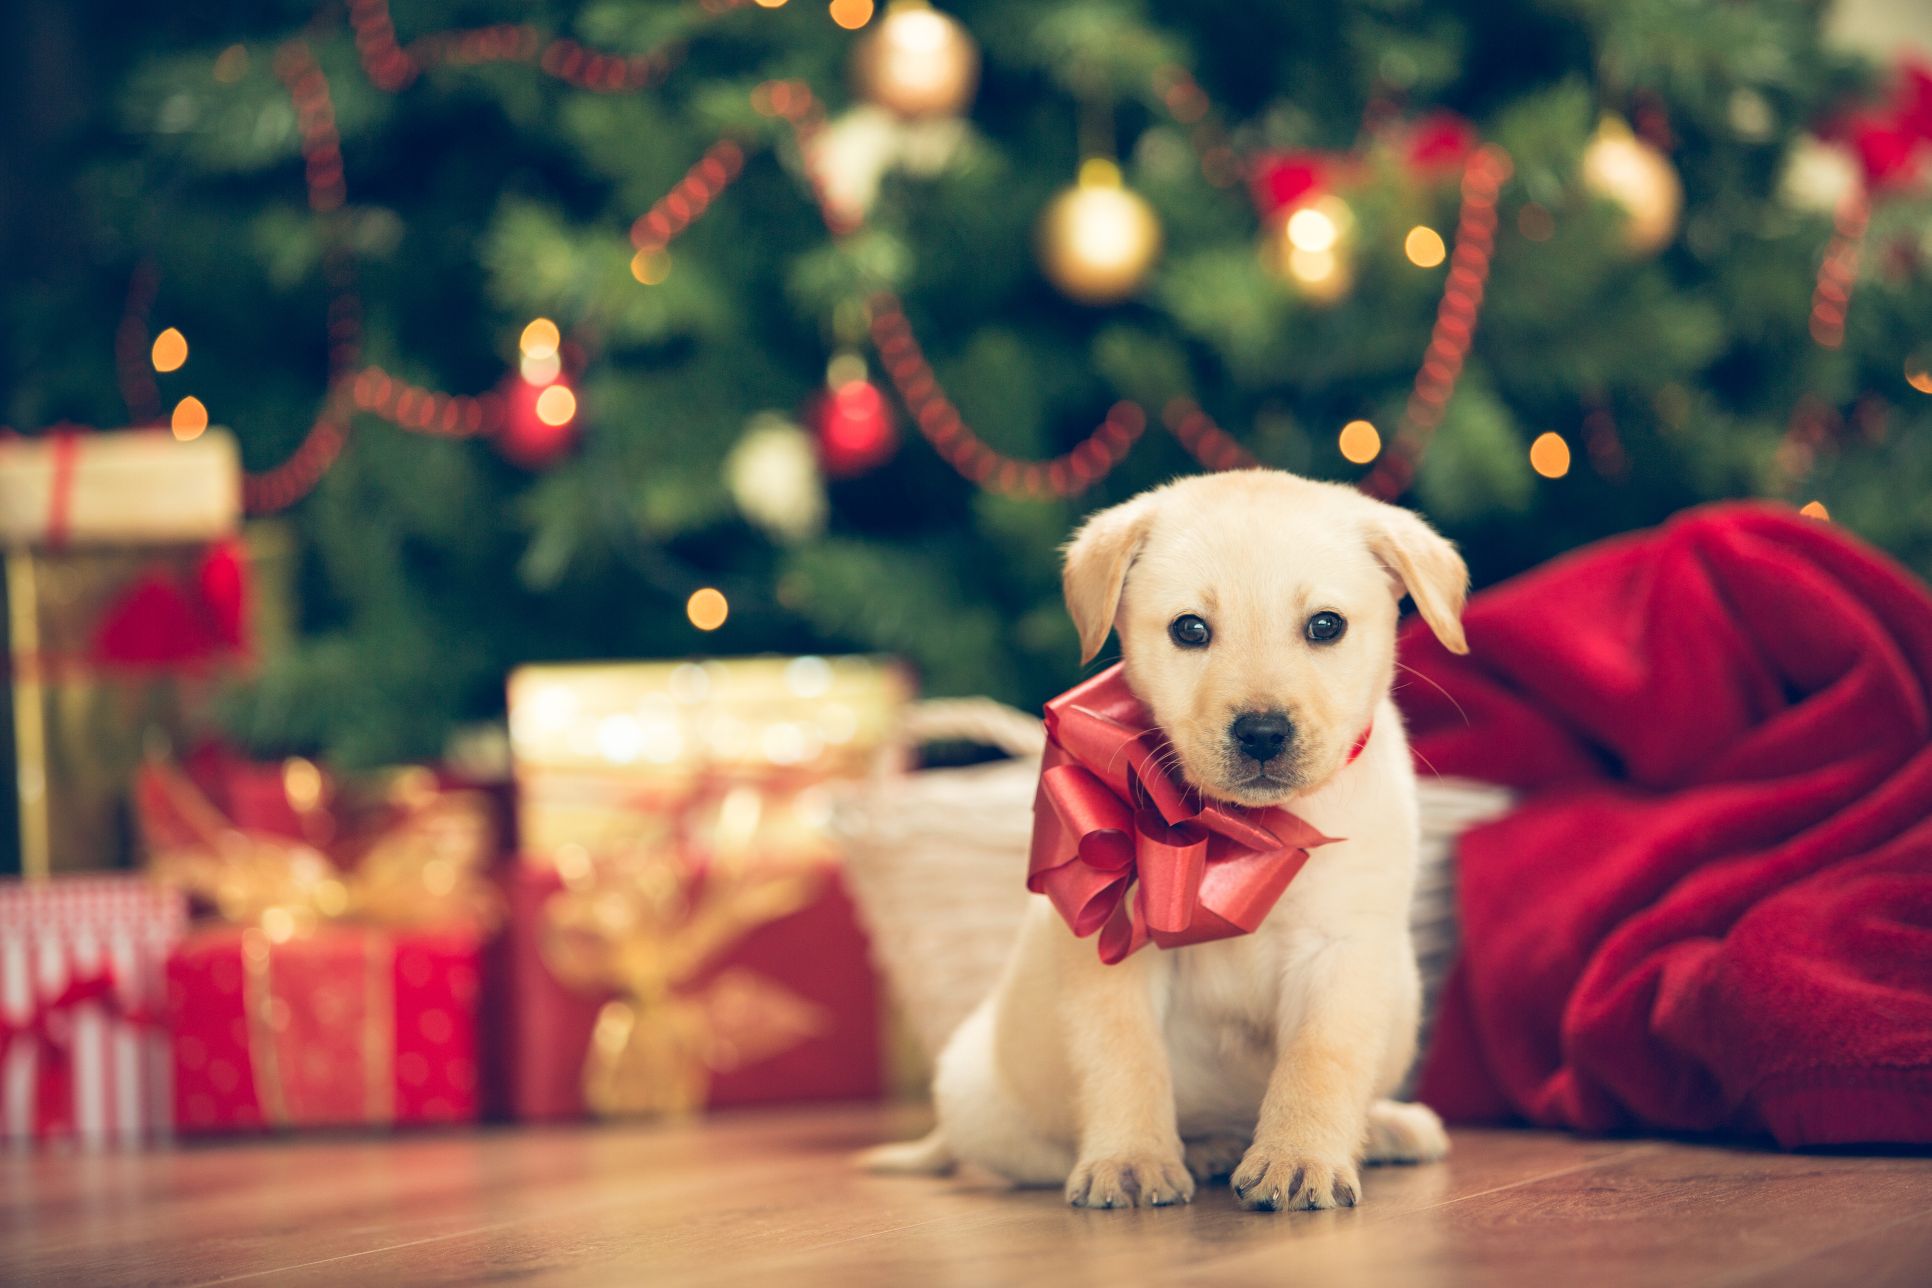 A puppy under christmas tree.